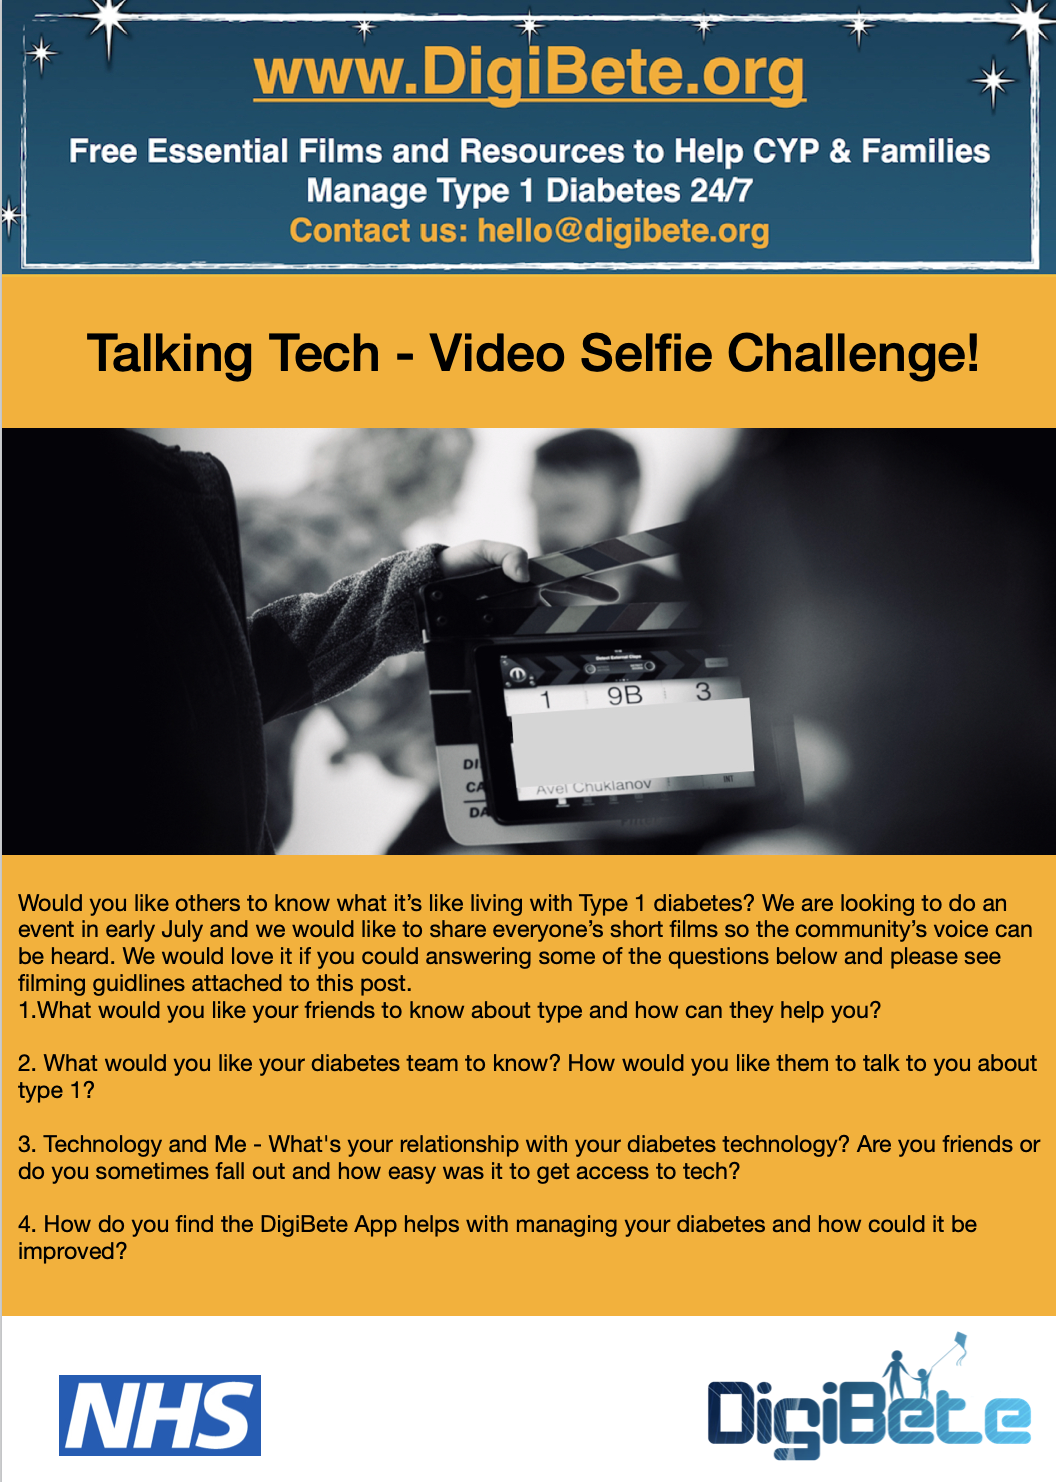 Take Part In Our Video Selfie Challenge